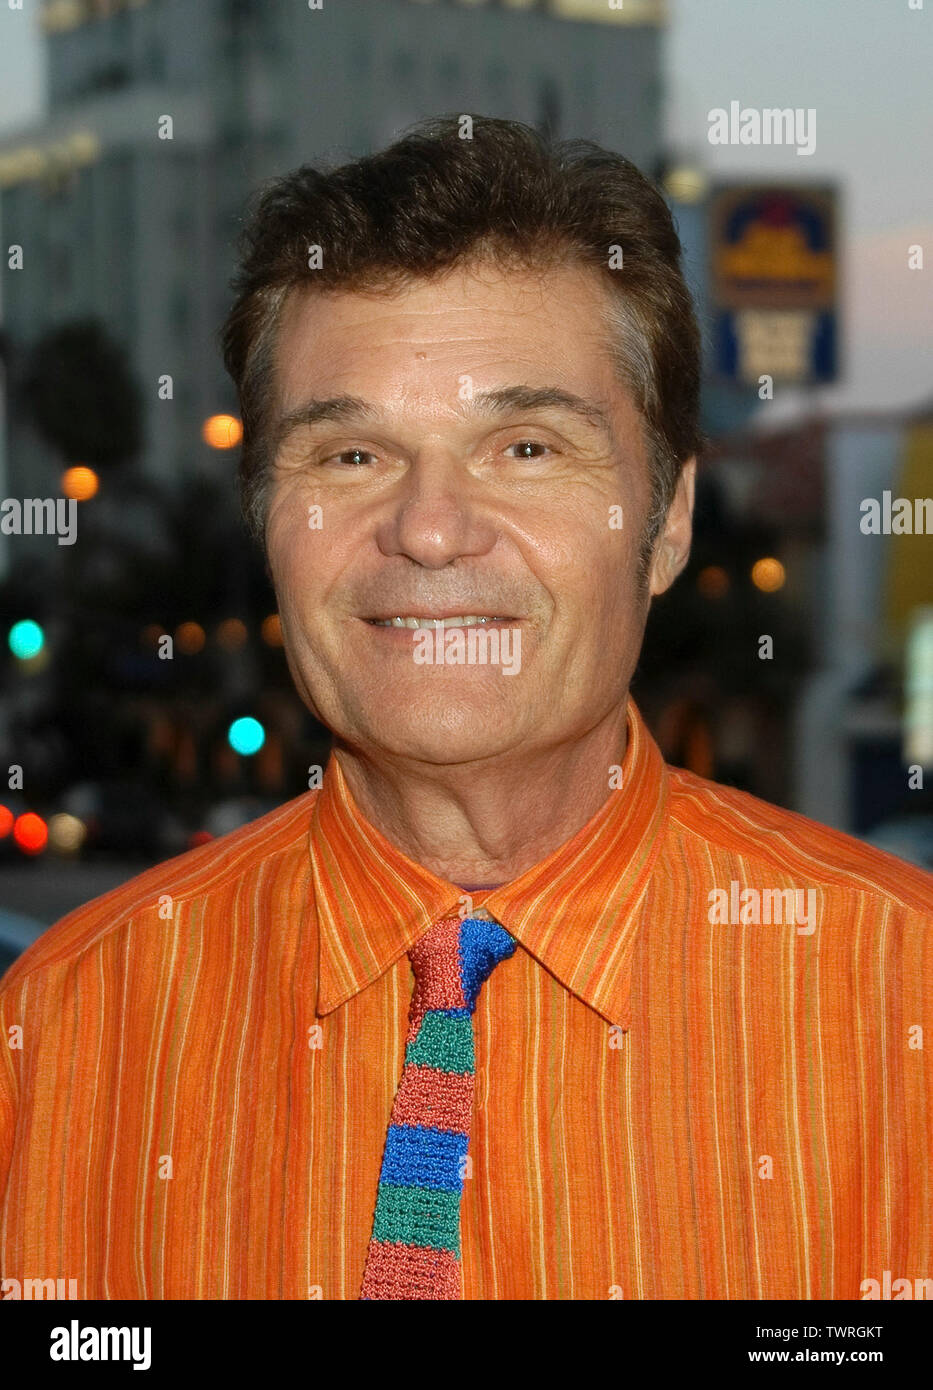 Fred Willard at The Smothers Brothers performance benefiting Children of the Night at the Comedy Store in West Hollywood, CA. The event took place on Thursday, July 31, 2003.  Photo credit: SBM / PictureLux File Reference # 33790-2990SMBPLX  For Editorial Use Only -  All Rights Reserved Stock Photo